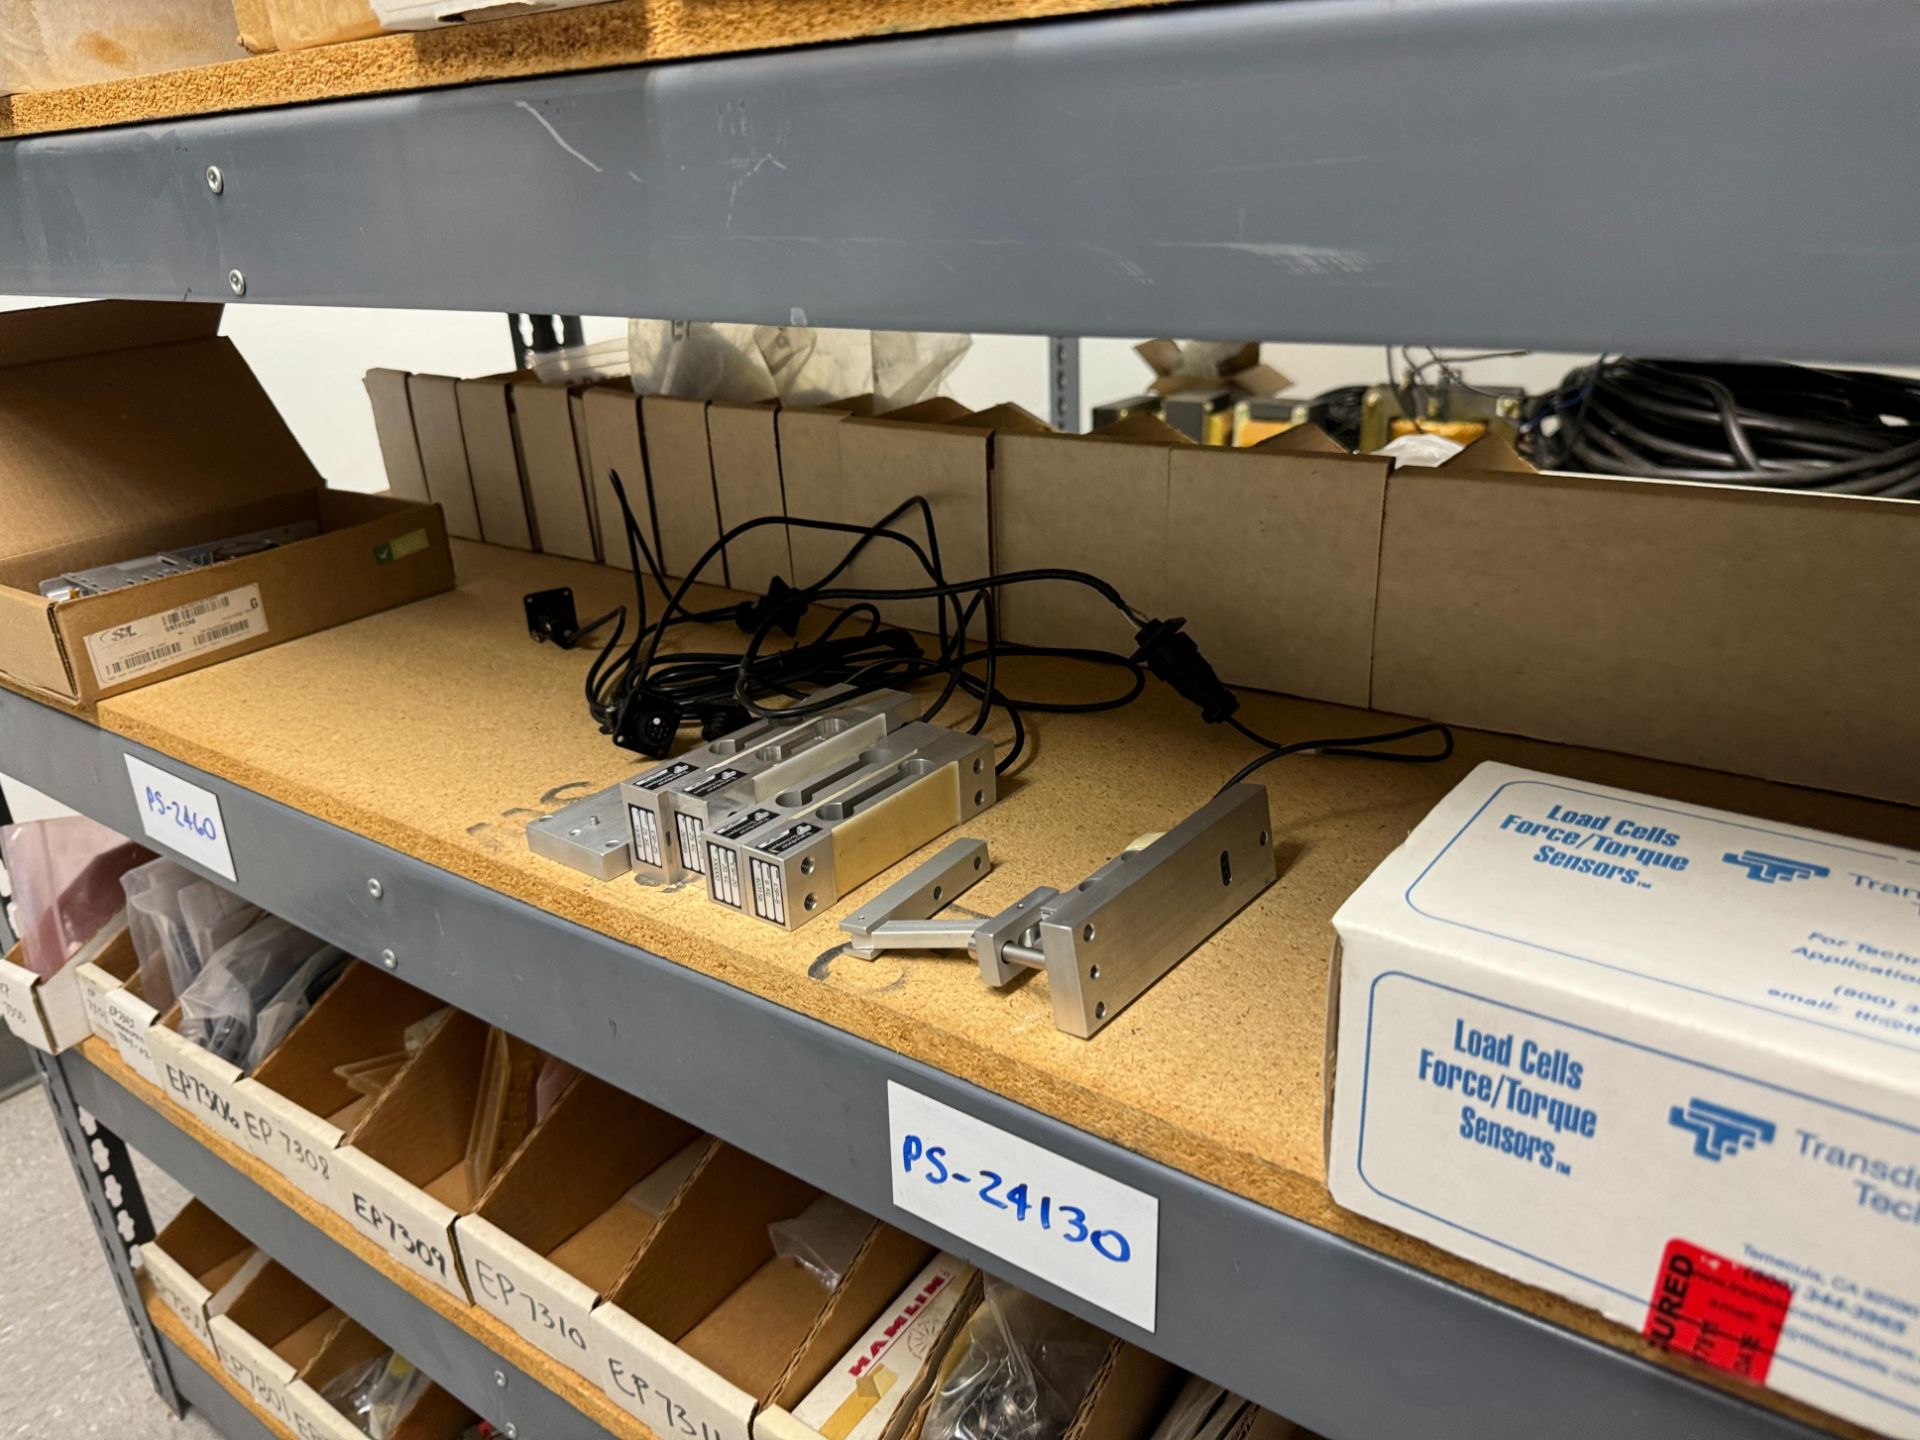 LOT - CONTENTS ONLY OF (1) SHELF, TO INCLUDE: MERCURY CONTACTORS, POWER SUPPLIES, LOAD CELLS, - Bild 2 aus 4